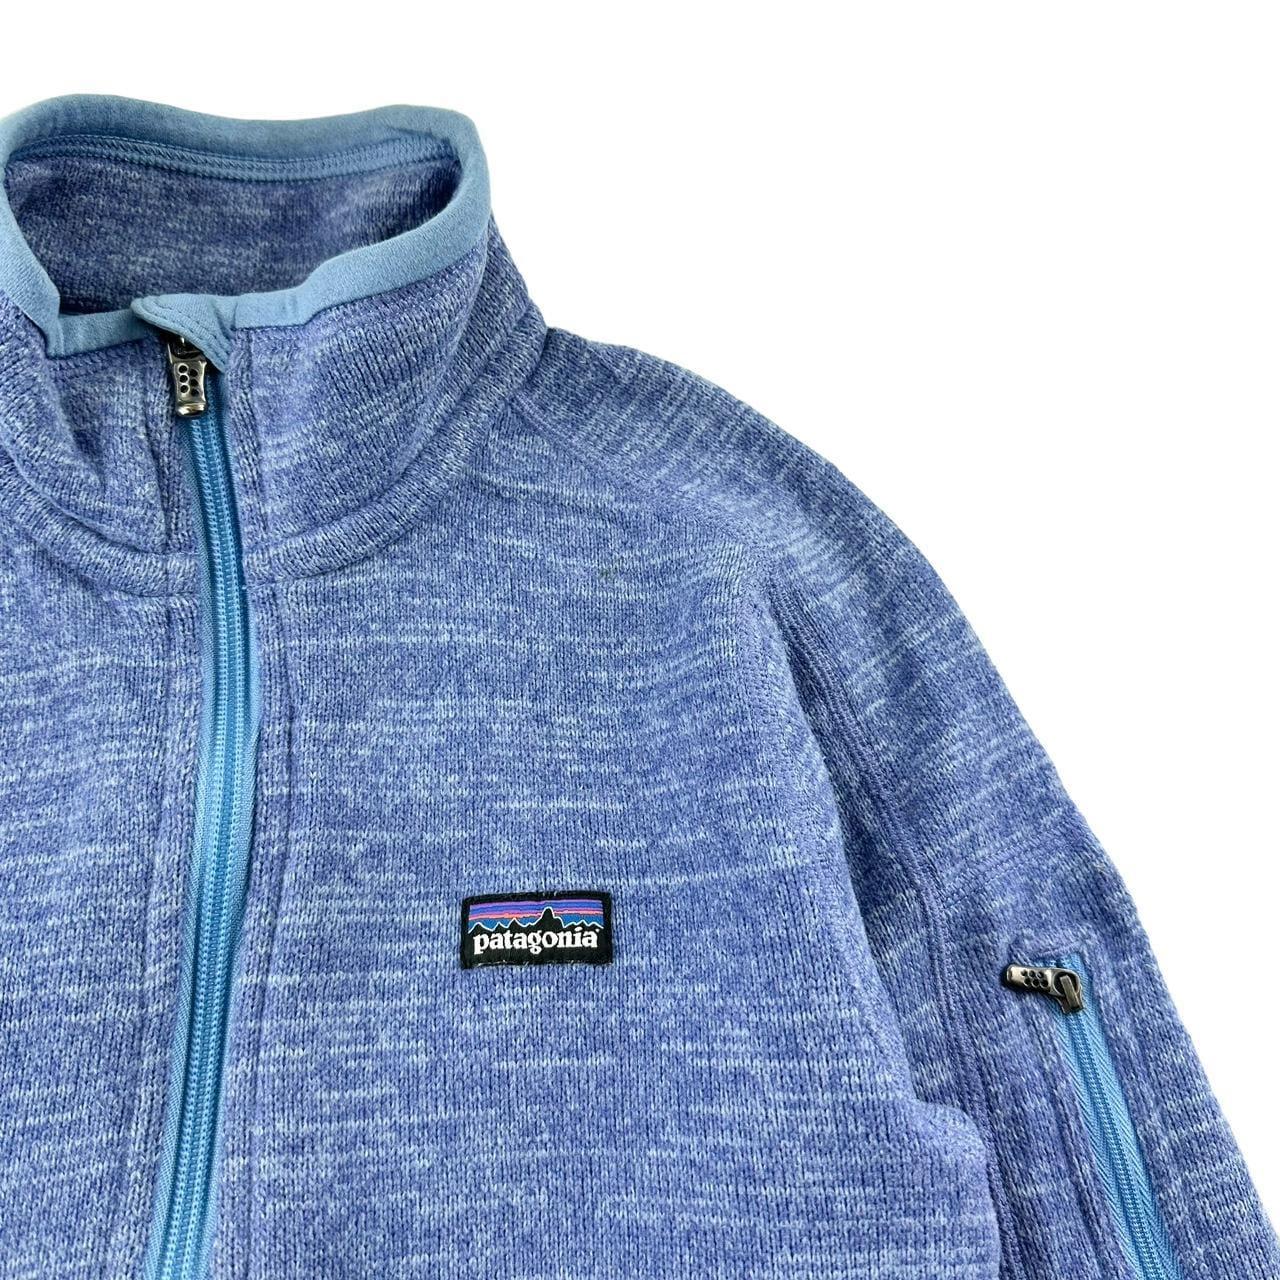 Patagonia zip jumper woman’s size XS - Known Source